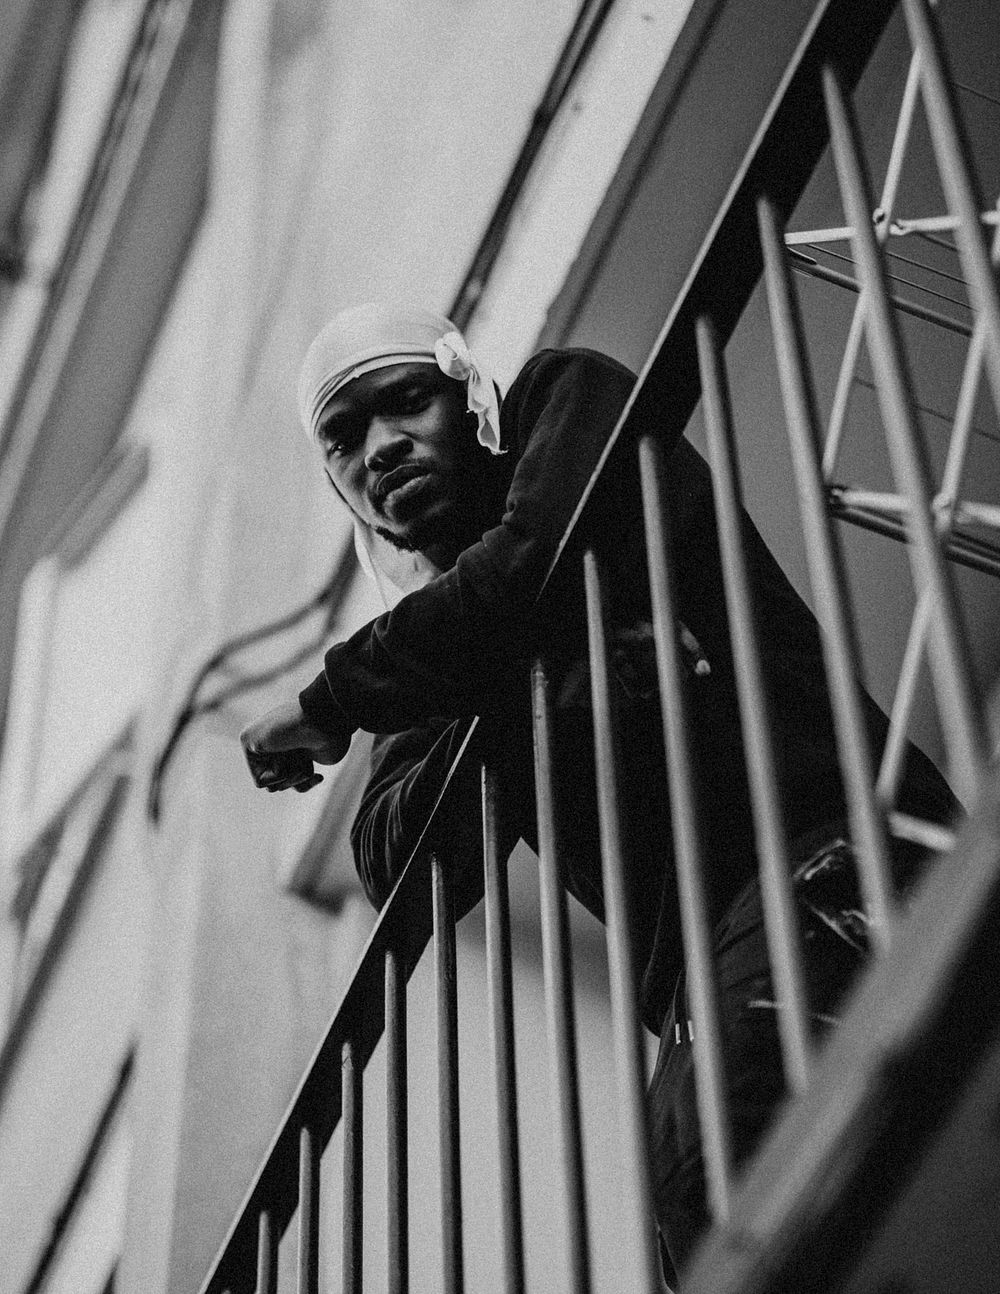 Man looking down from his balcony during social isolation due to the covid-19 pandemic in Britain.